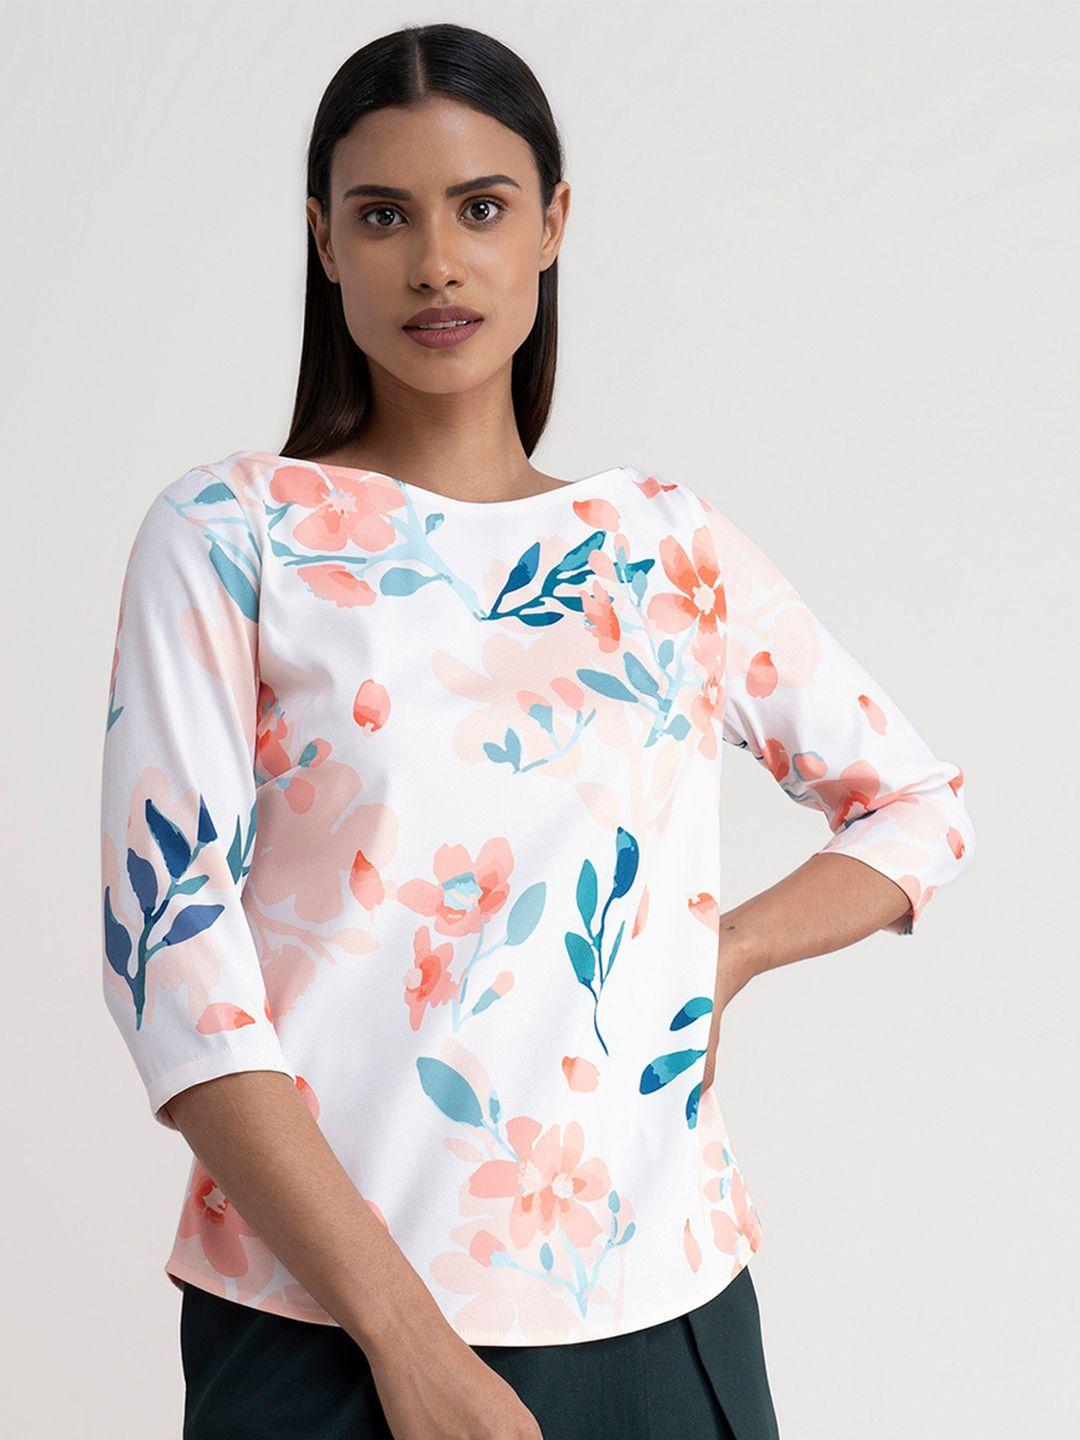 fablestreet white & blue floral print top